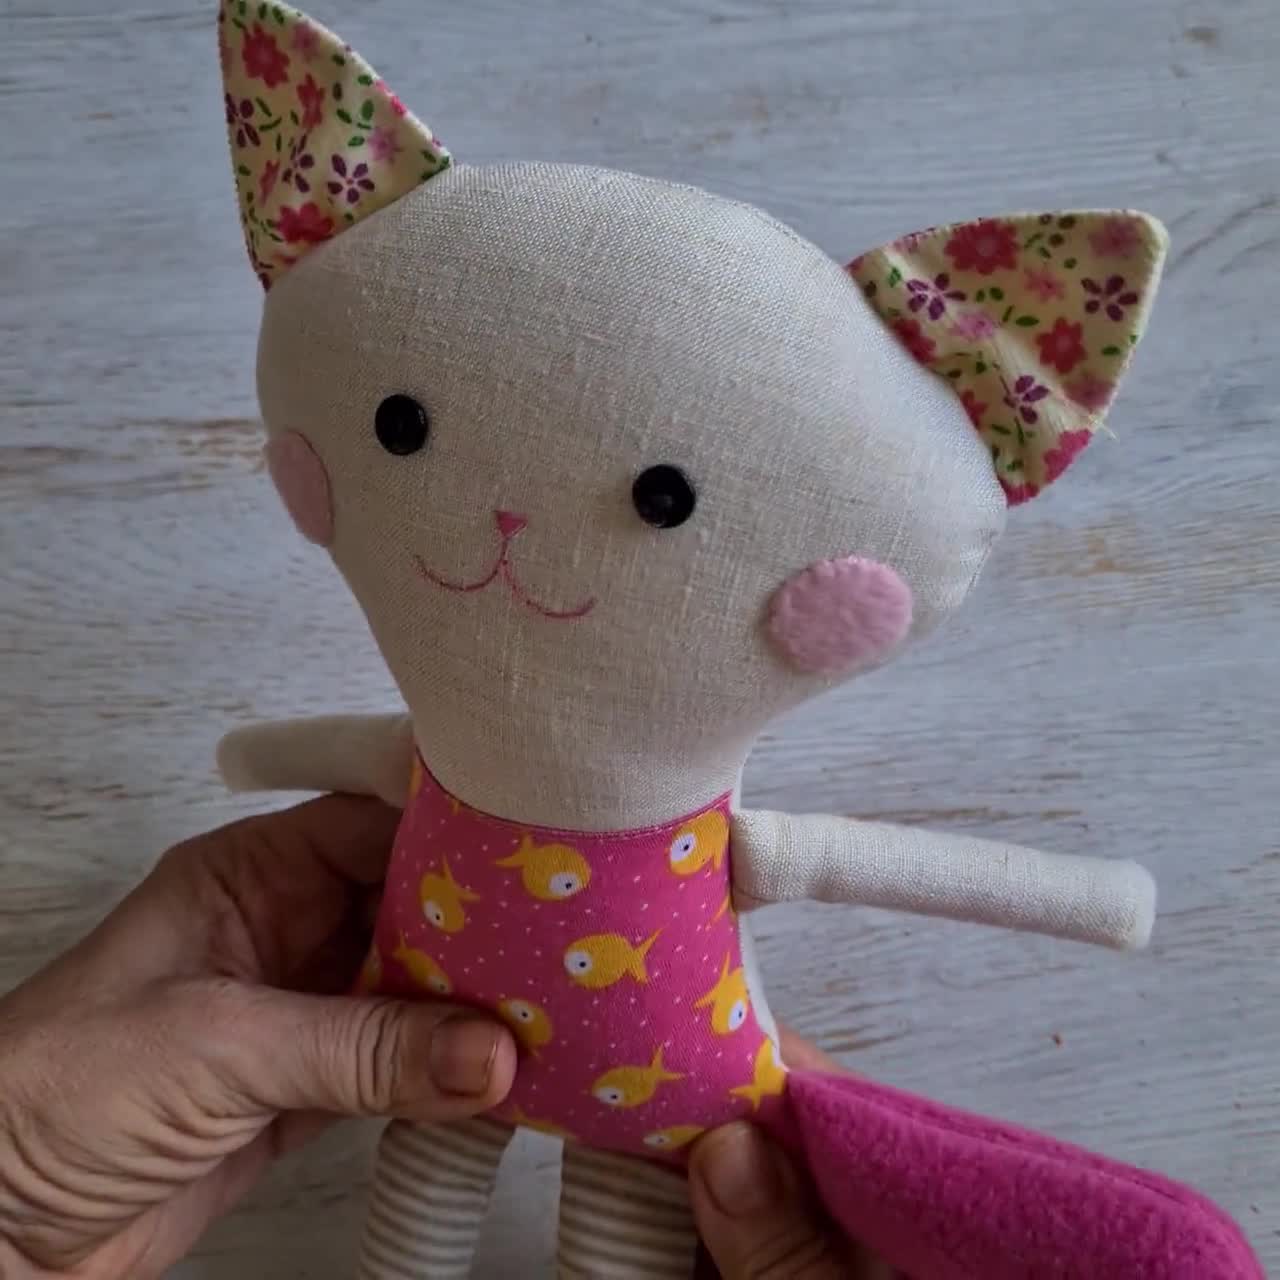 Handmade Toys Made Of Fabric For Children Or As A Gift. Cat Stock